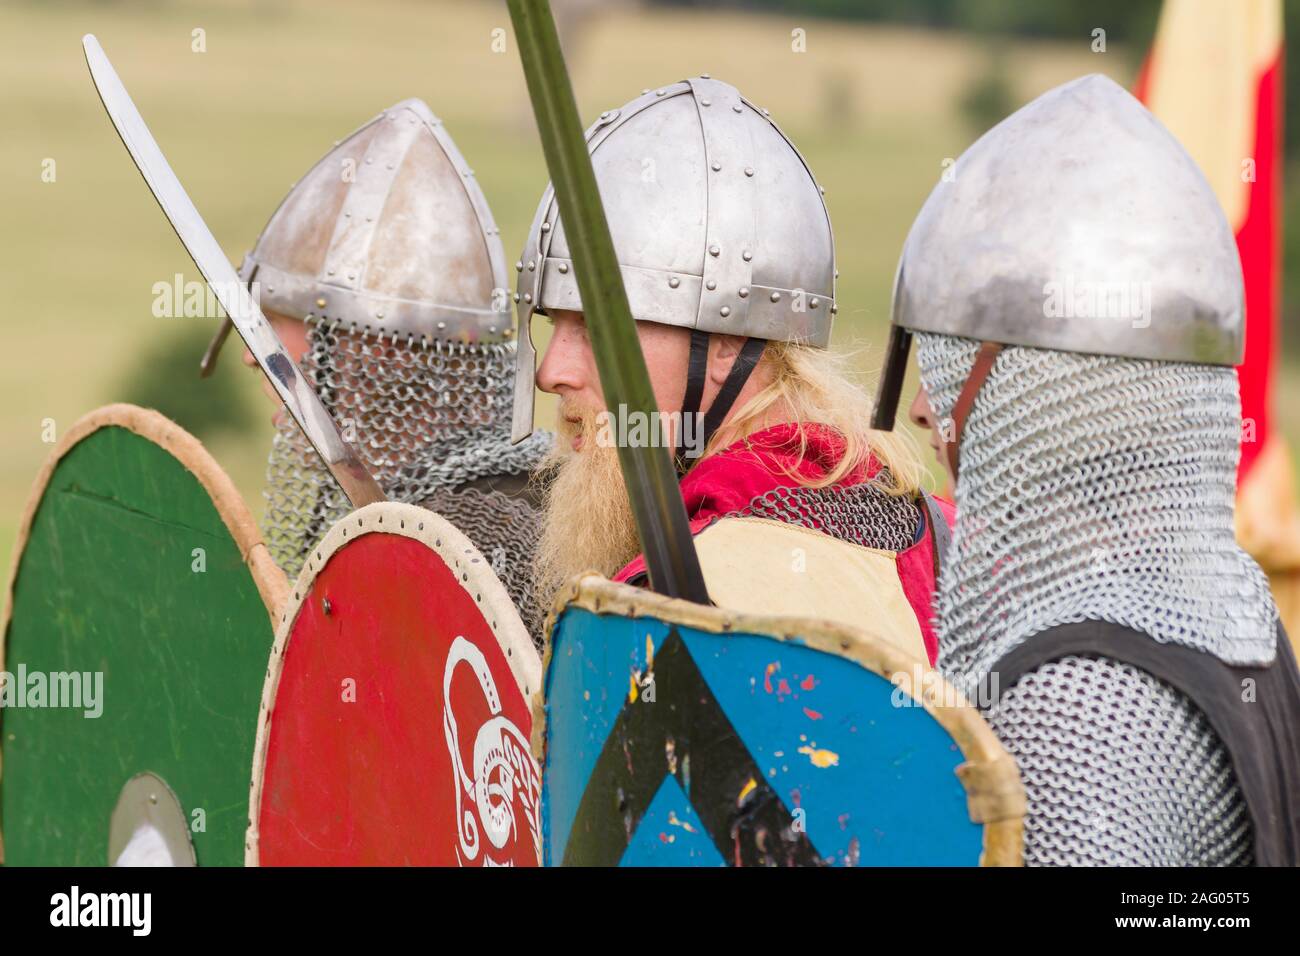 Medieval battle re-enactment with men dressed in chain mail and helmets armed with swords and shields Stock Photo